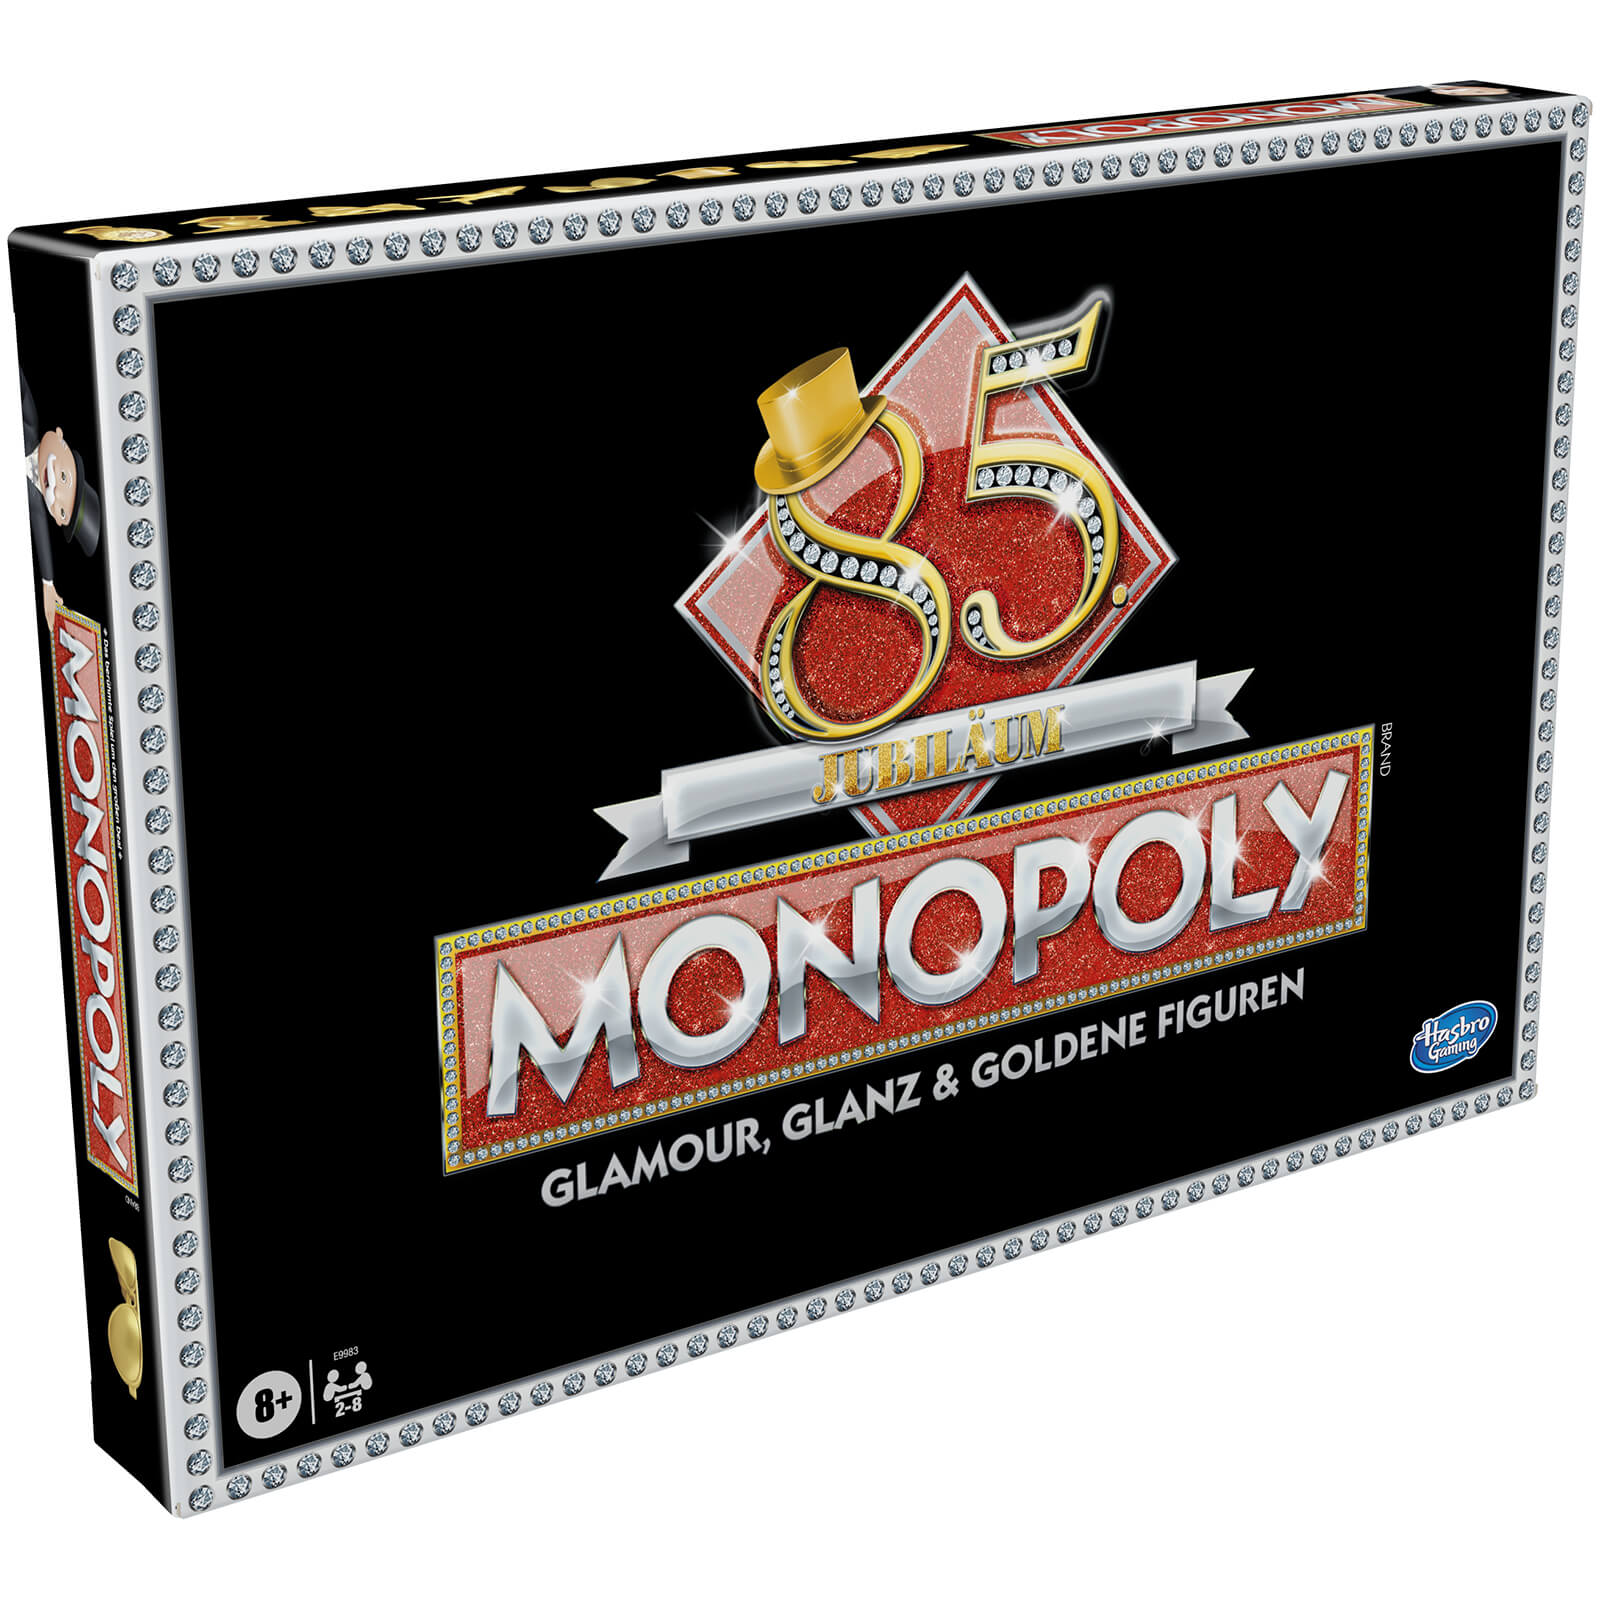 Monopoly 85th Anniversary Board Game